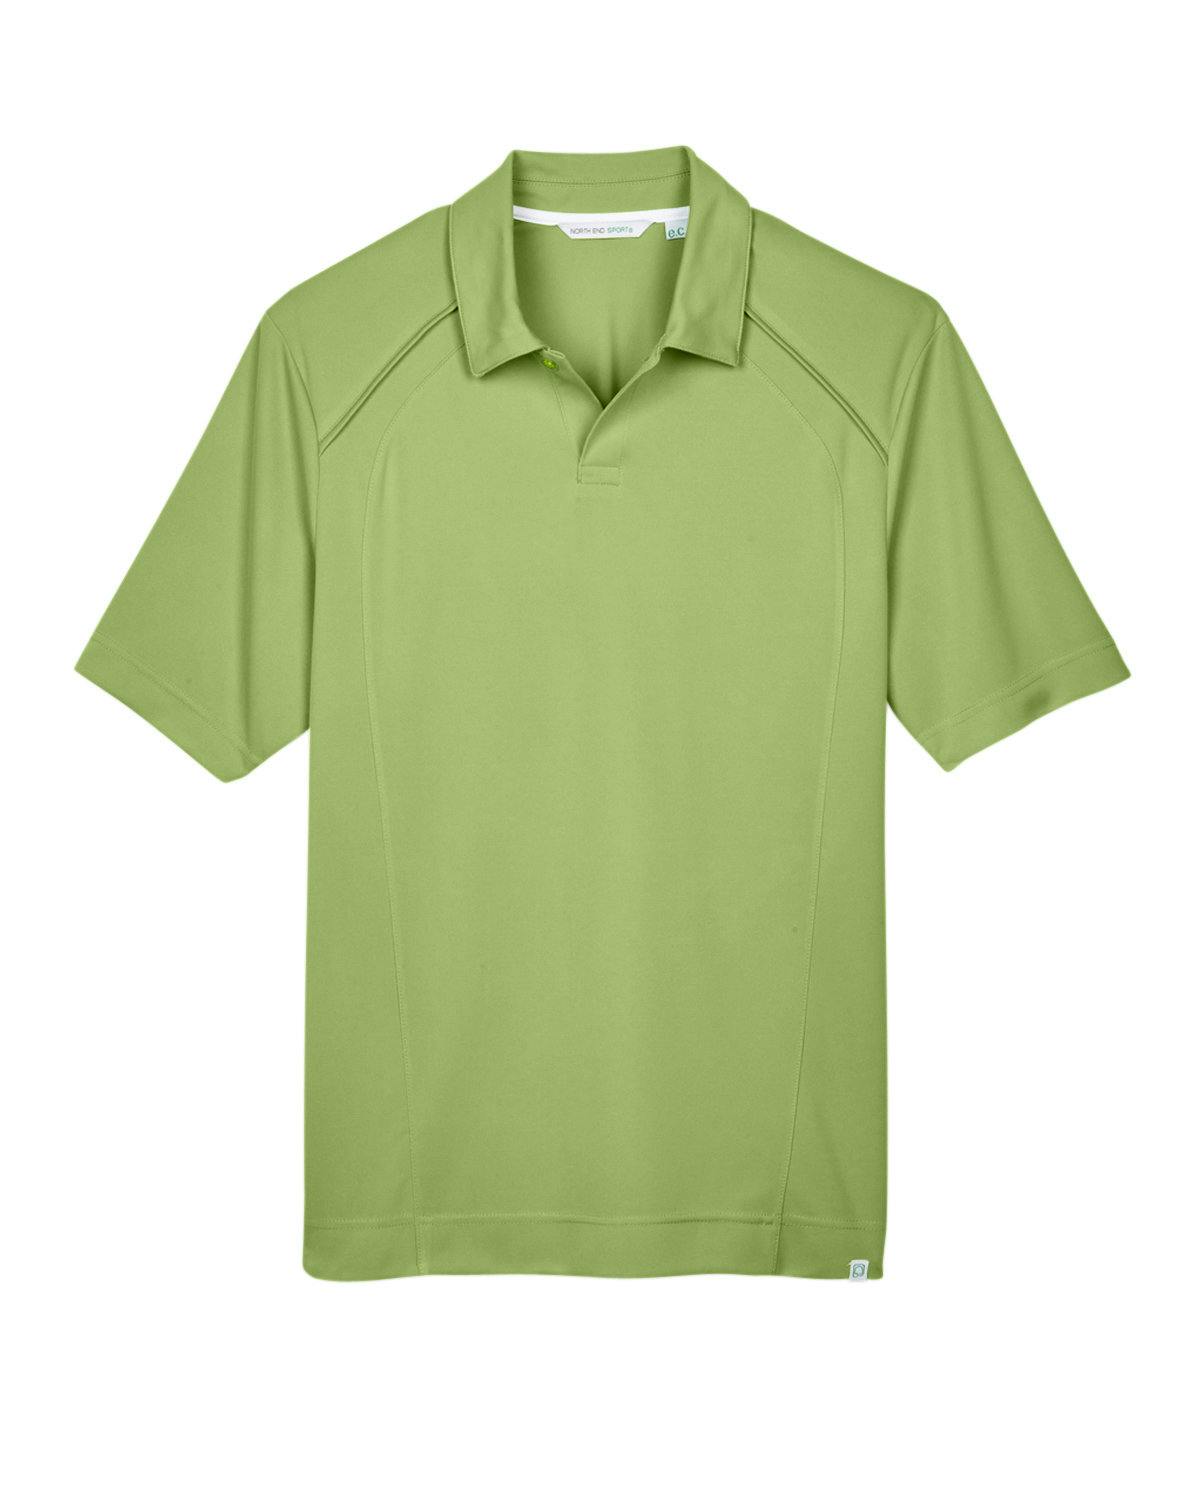 Image for Men's Recycled Polyester Performance Piqué Polo